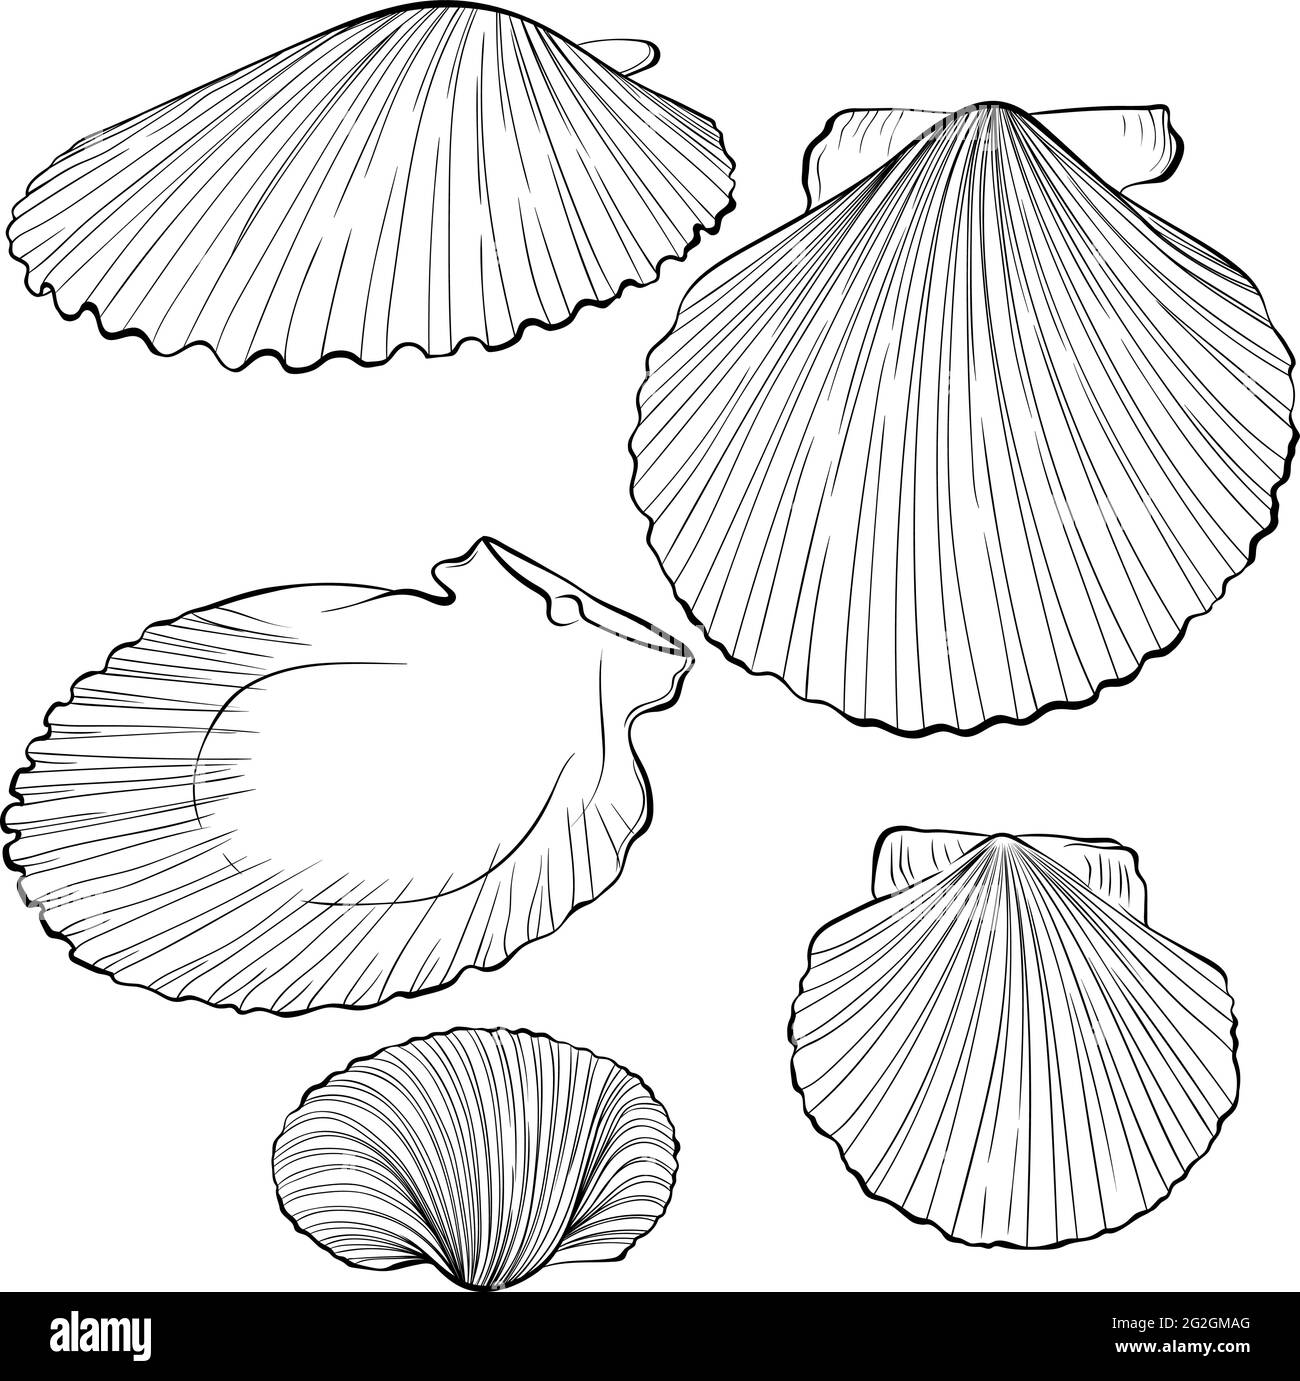 Scallop shells from different angles line art Stock Vector